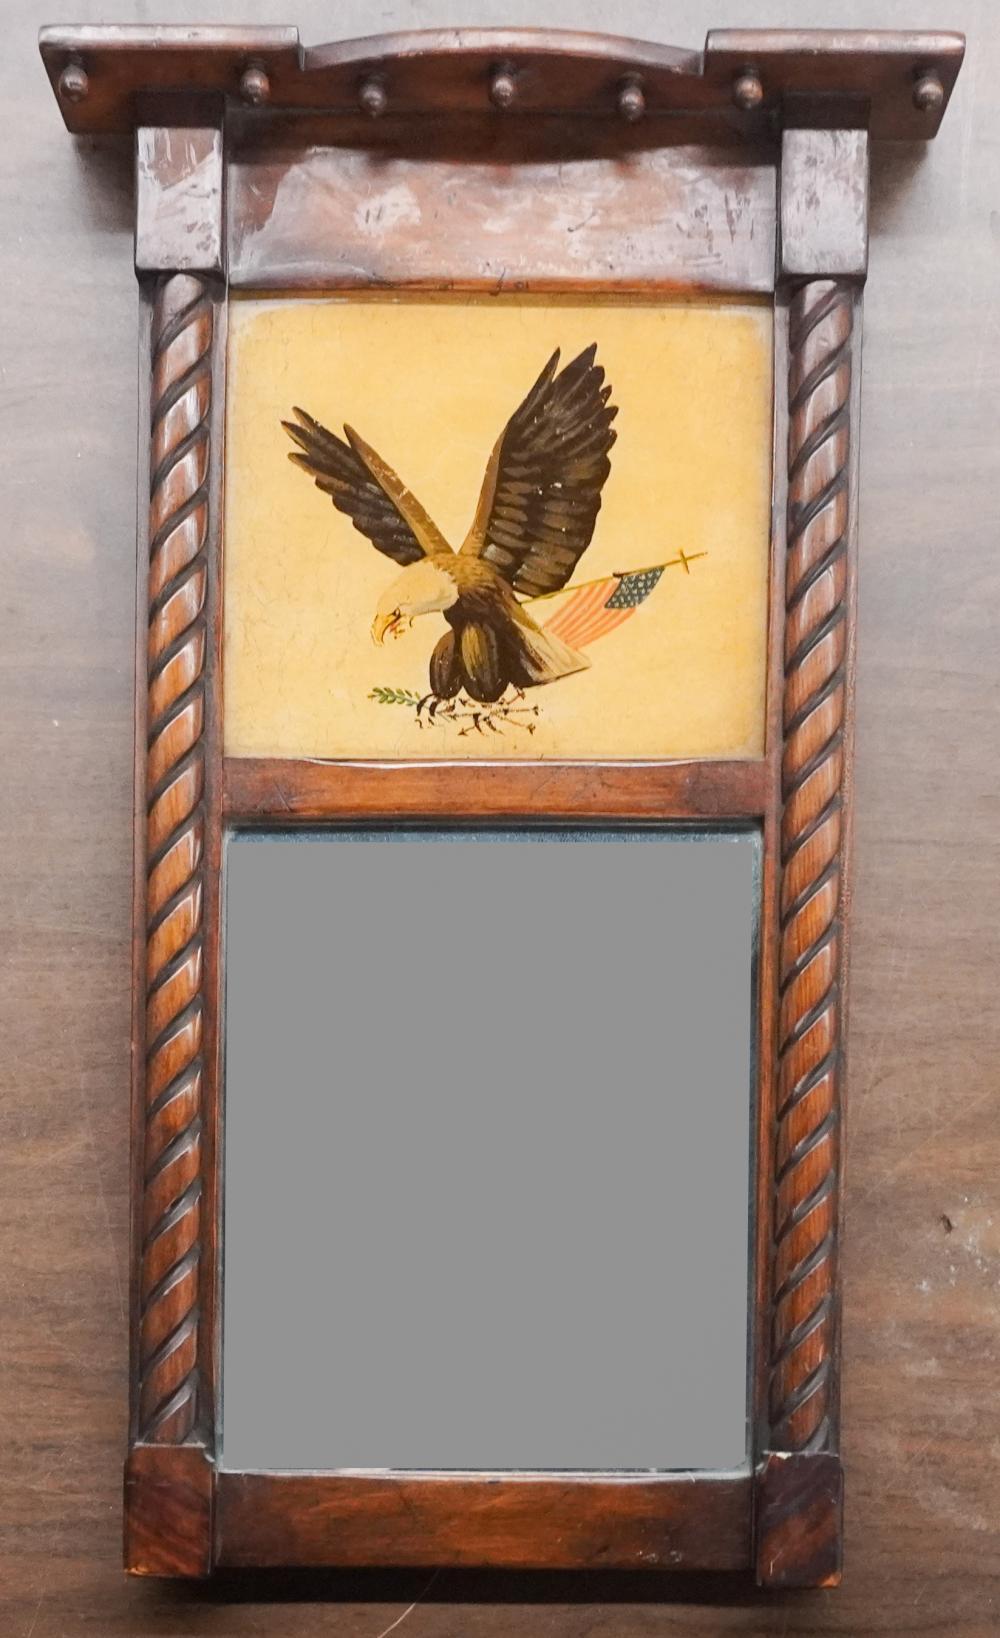 An Early 20th Century Federal Style Mahogany Trumeau Mirror with hand painted  on board perched eagle with yellow background. Measures 21.5